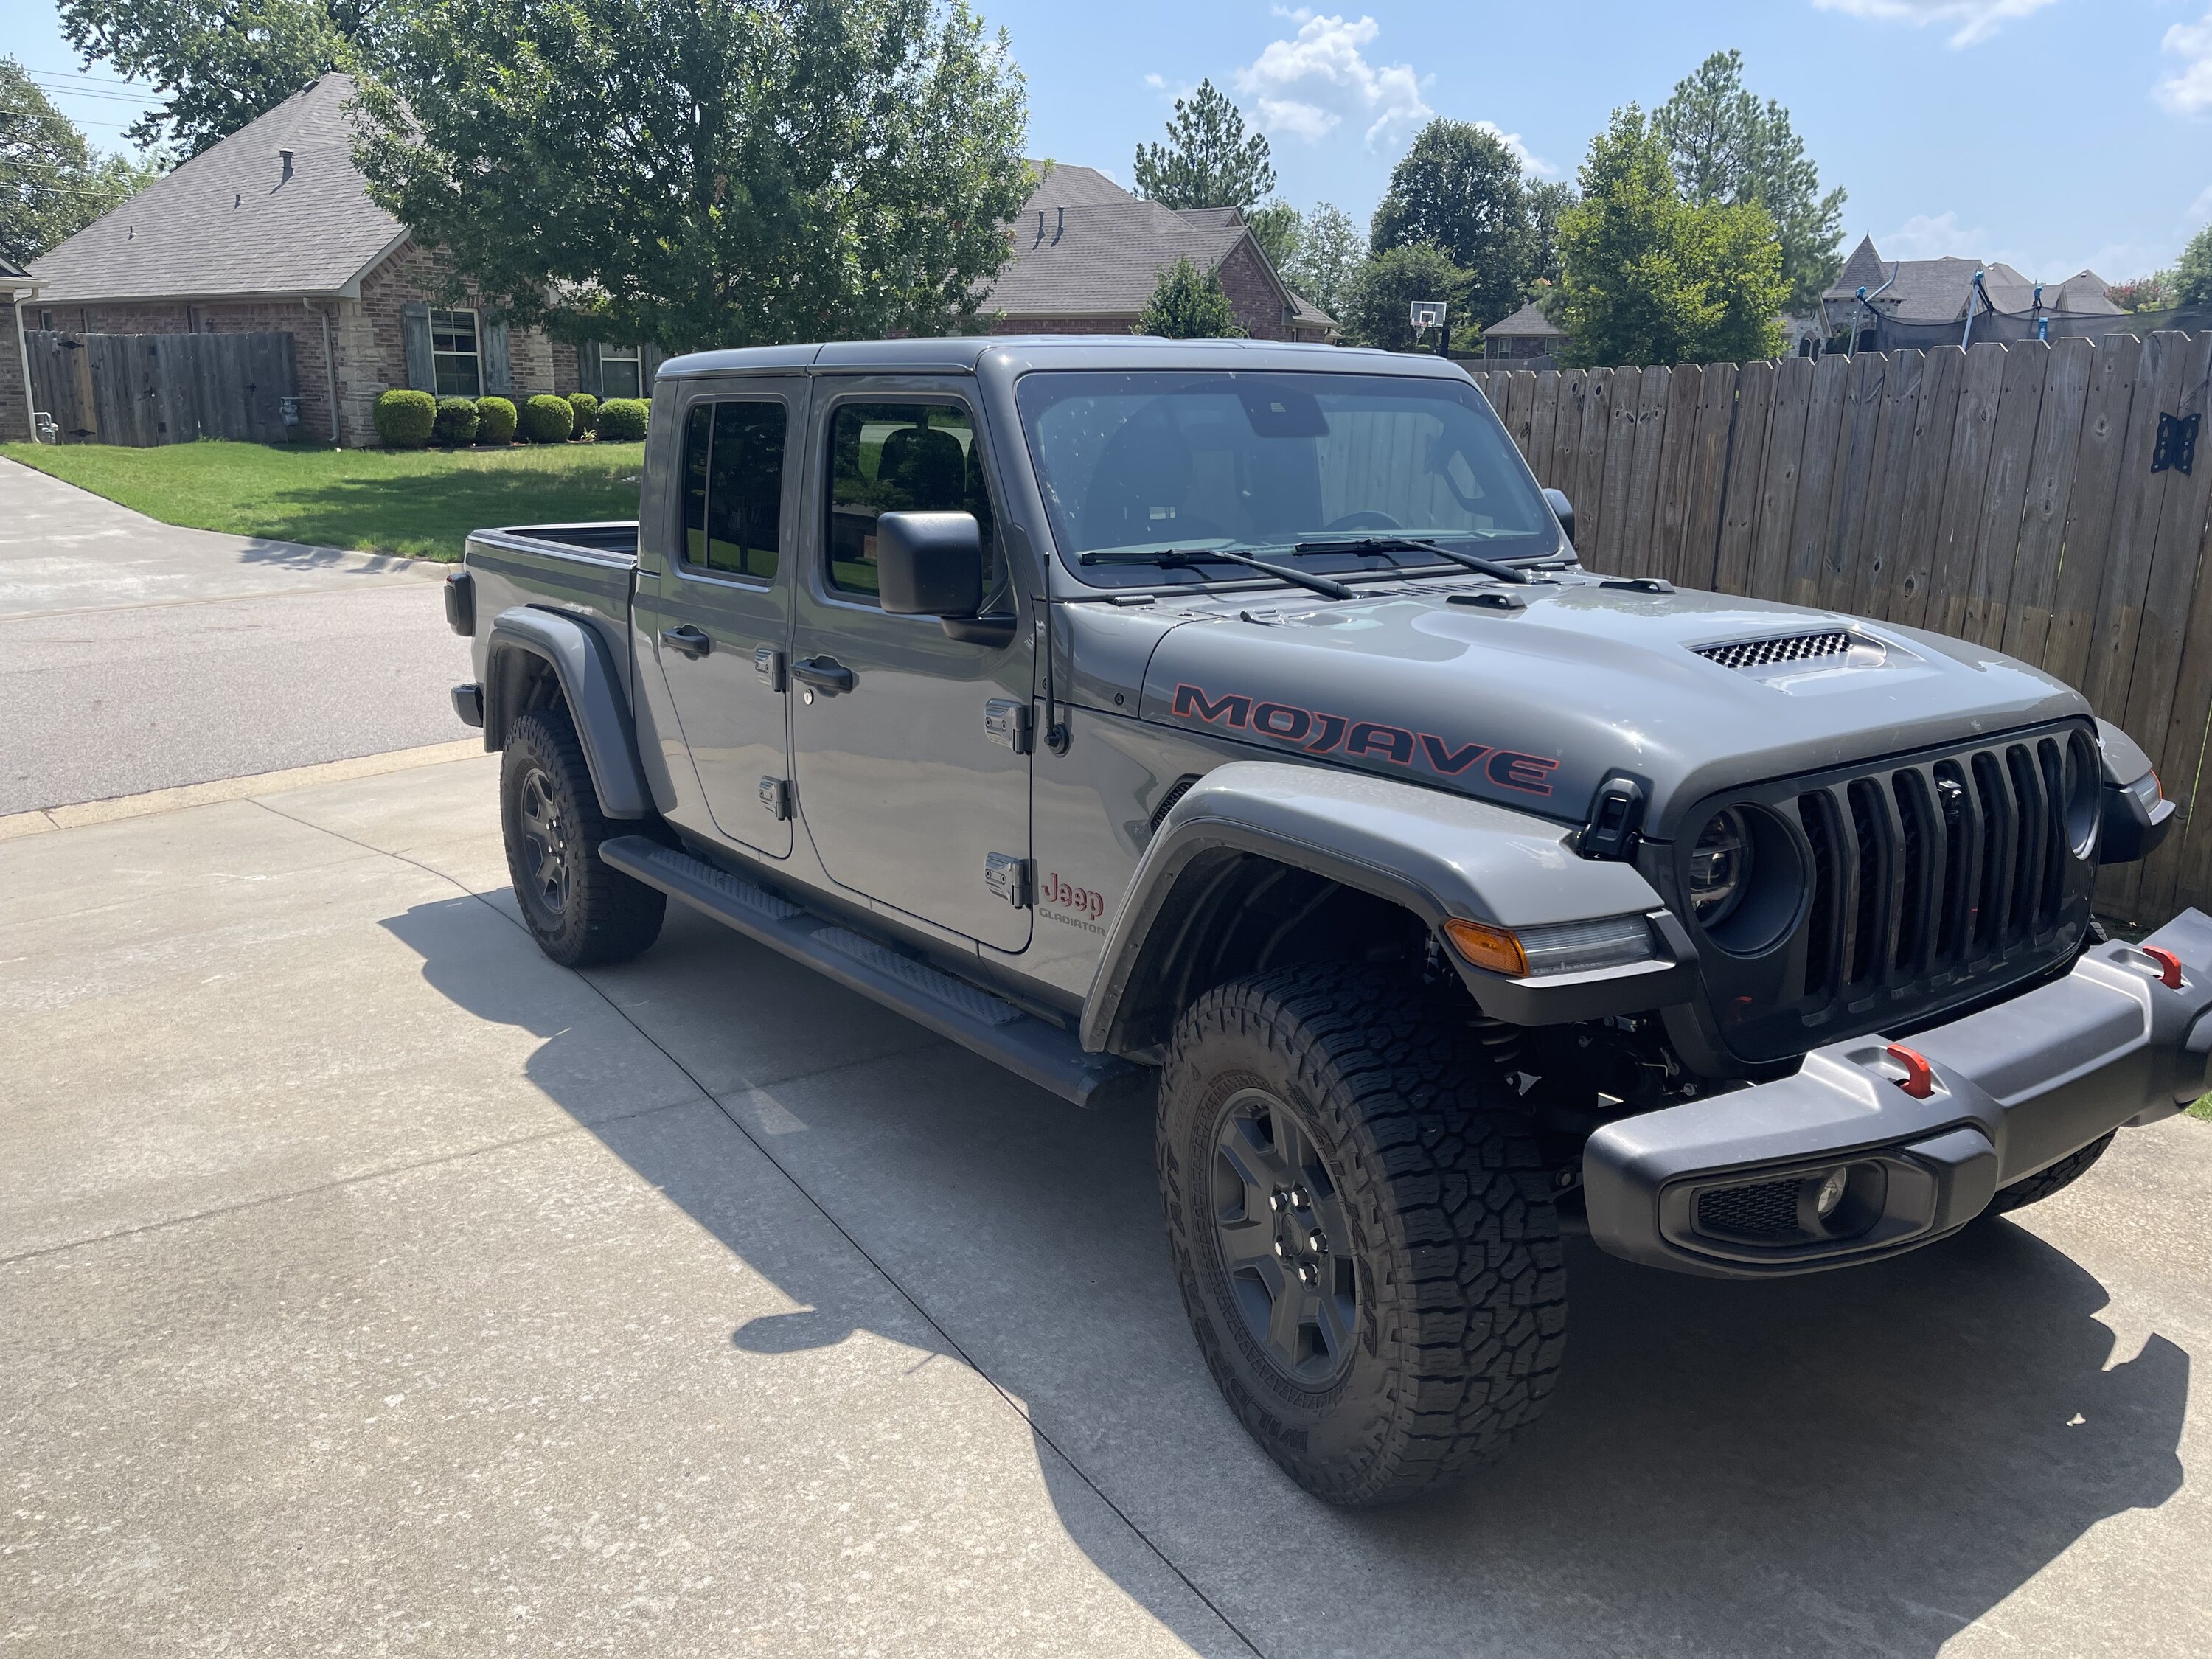 Jeep Gladiator Slow Sting Gray Overlanding Build - Jeeper479479 IMG_2707